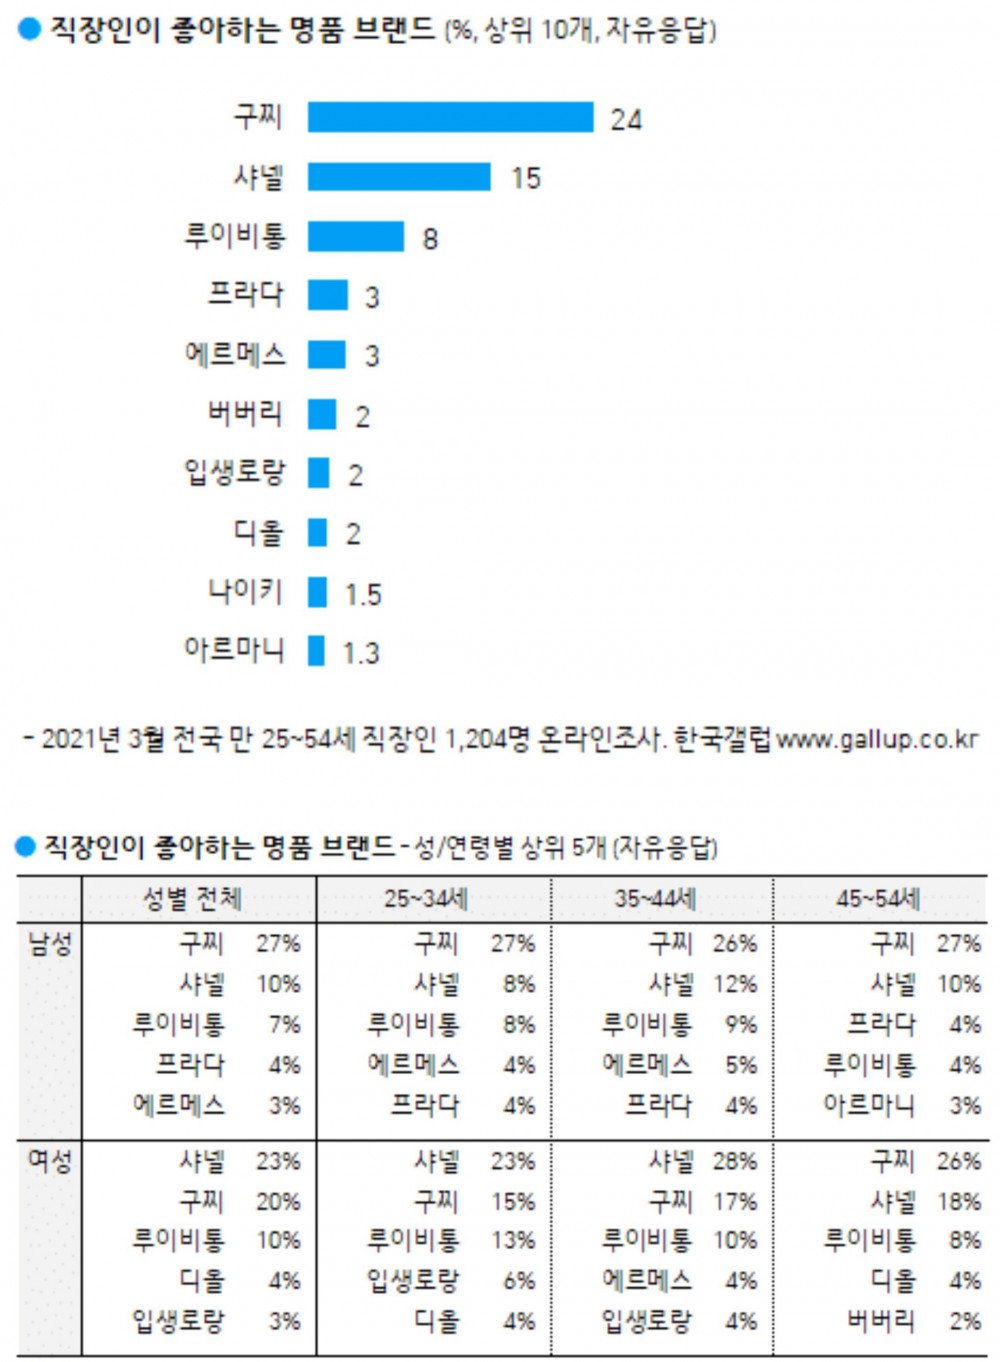 What are the most popular luxury brands in Korea?